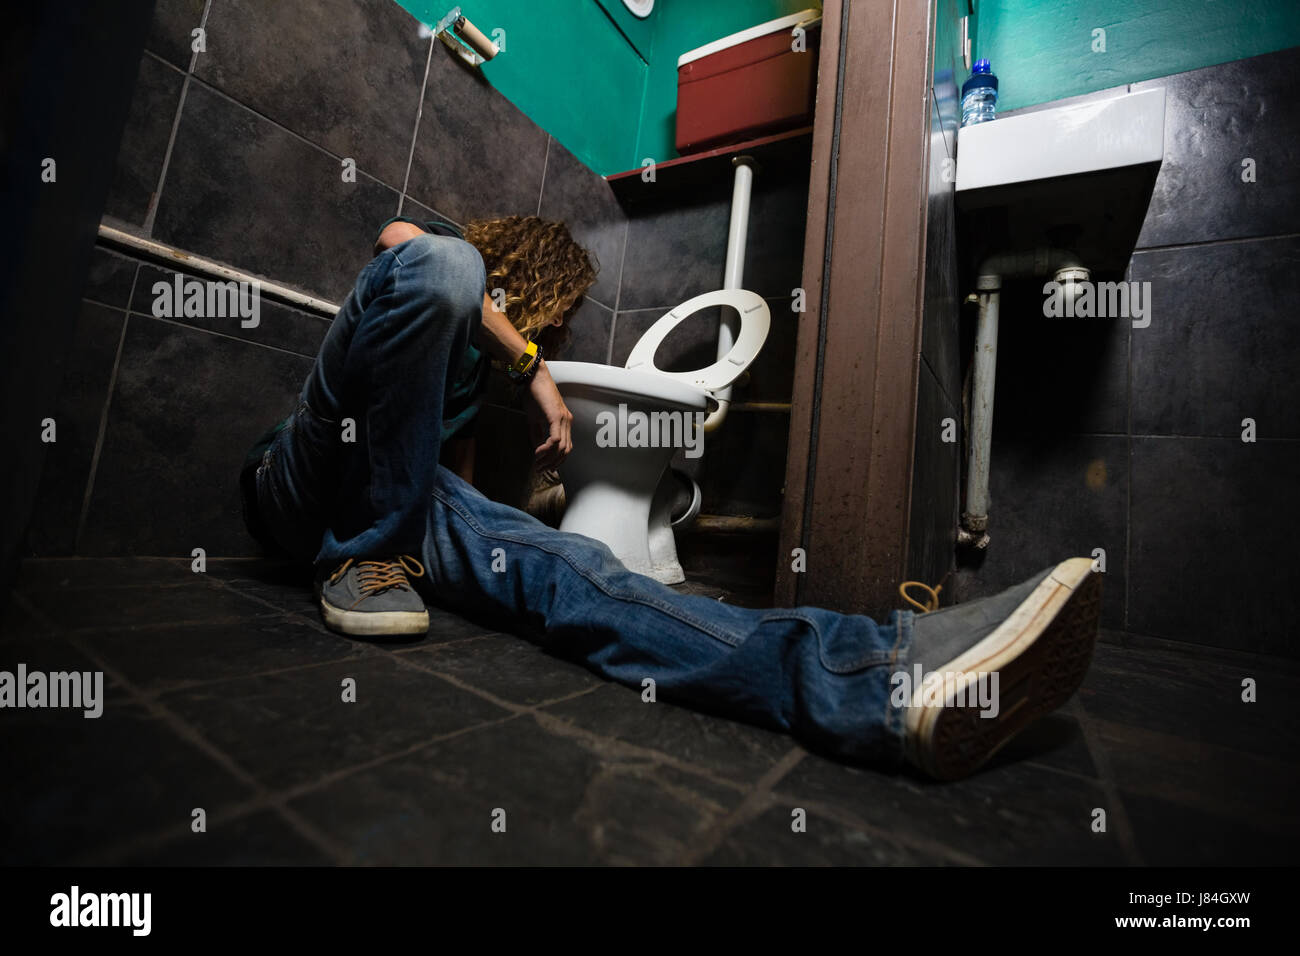 Man vomiting on toilet bowl in the washroom Stock Photo